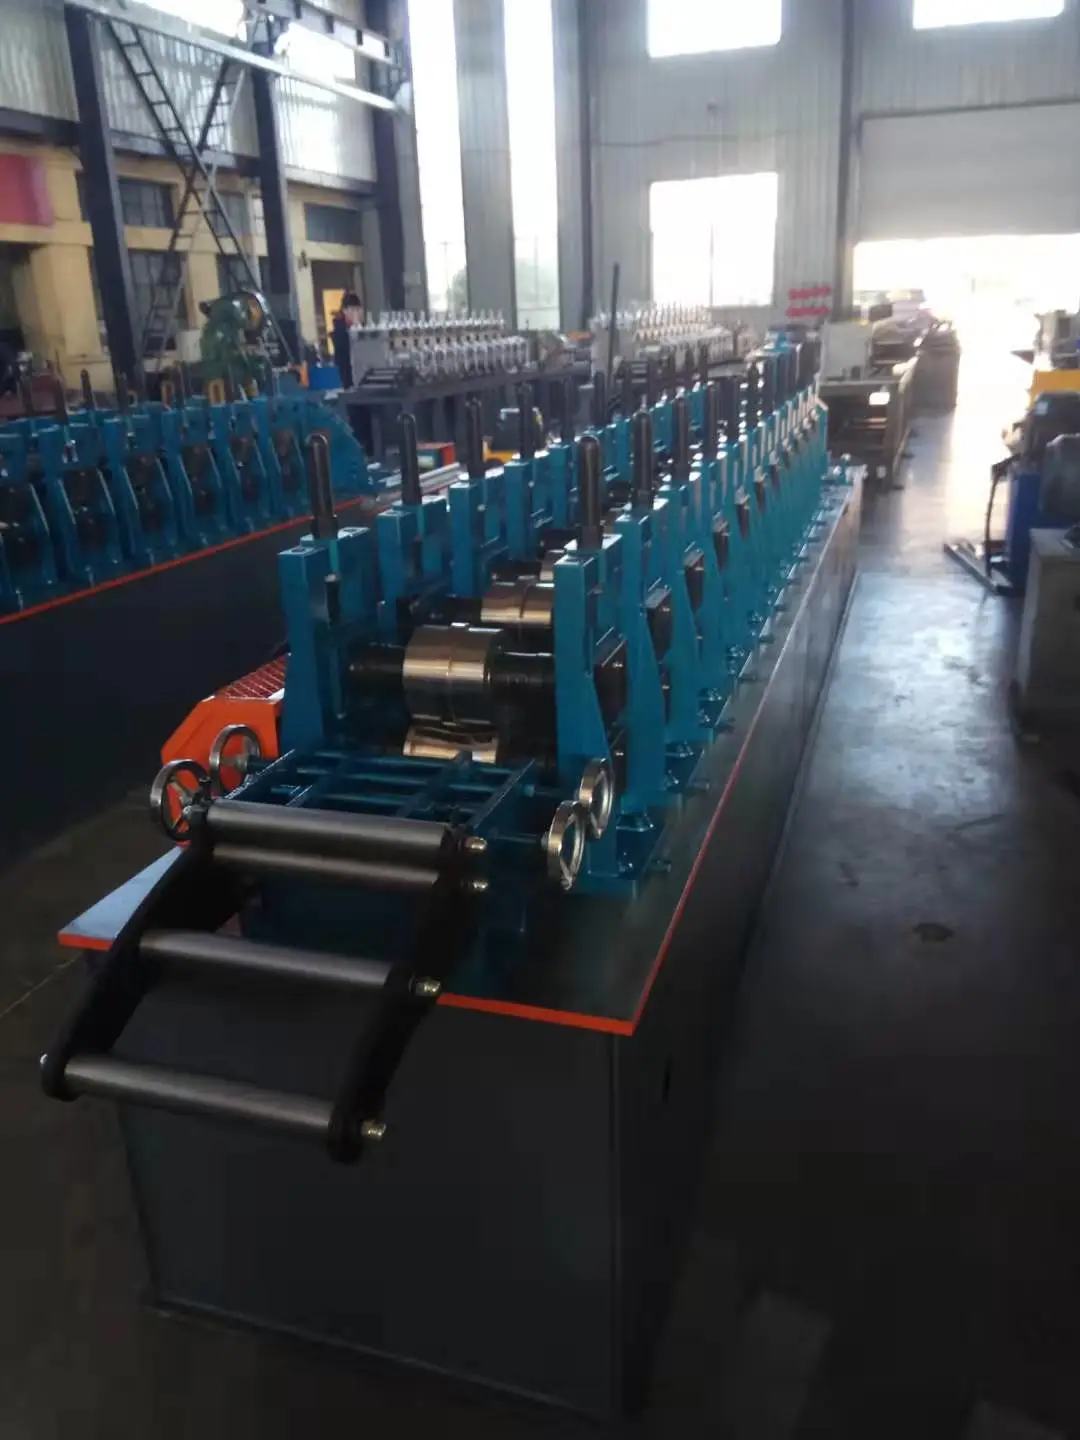 rollers of High precision C U channel 60*27 27*28 light keel roll forming machine.jpg